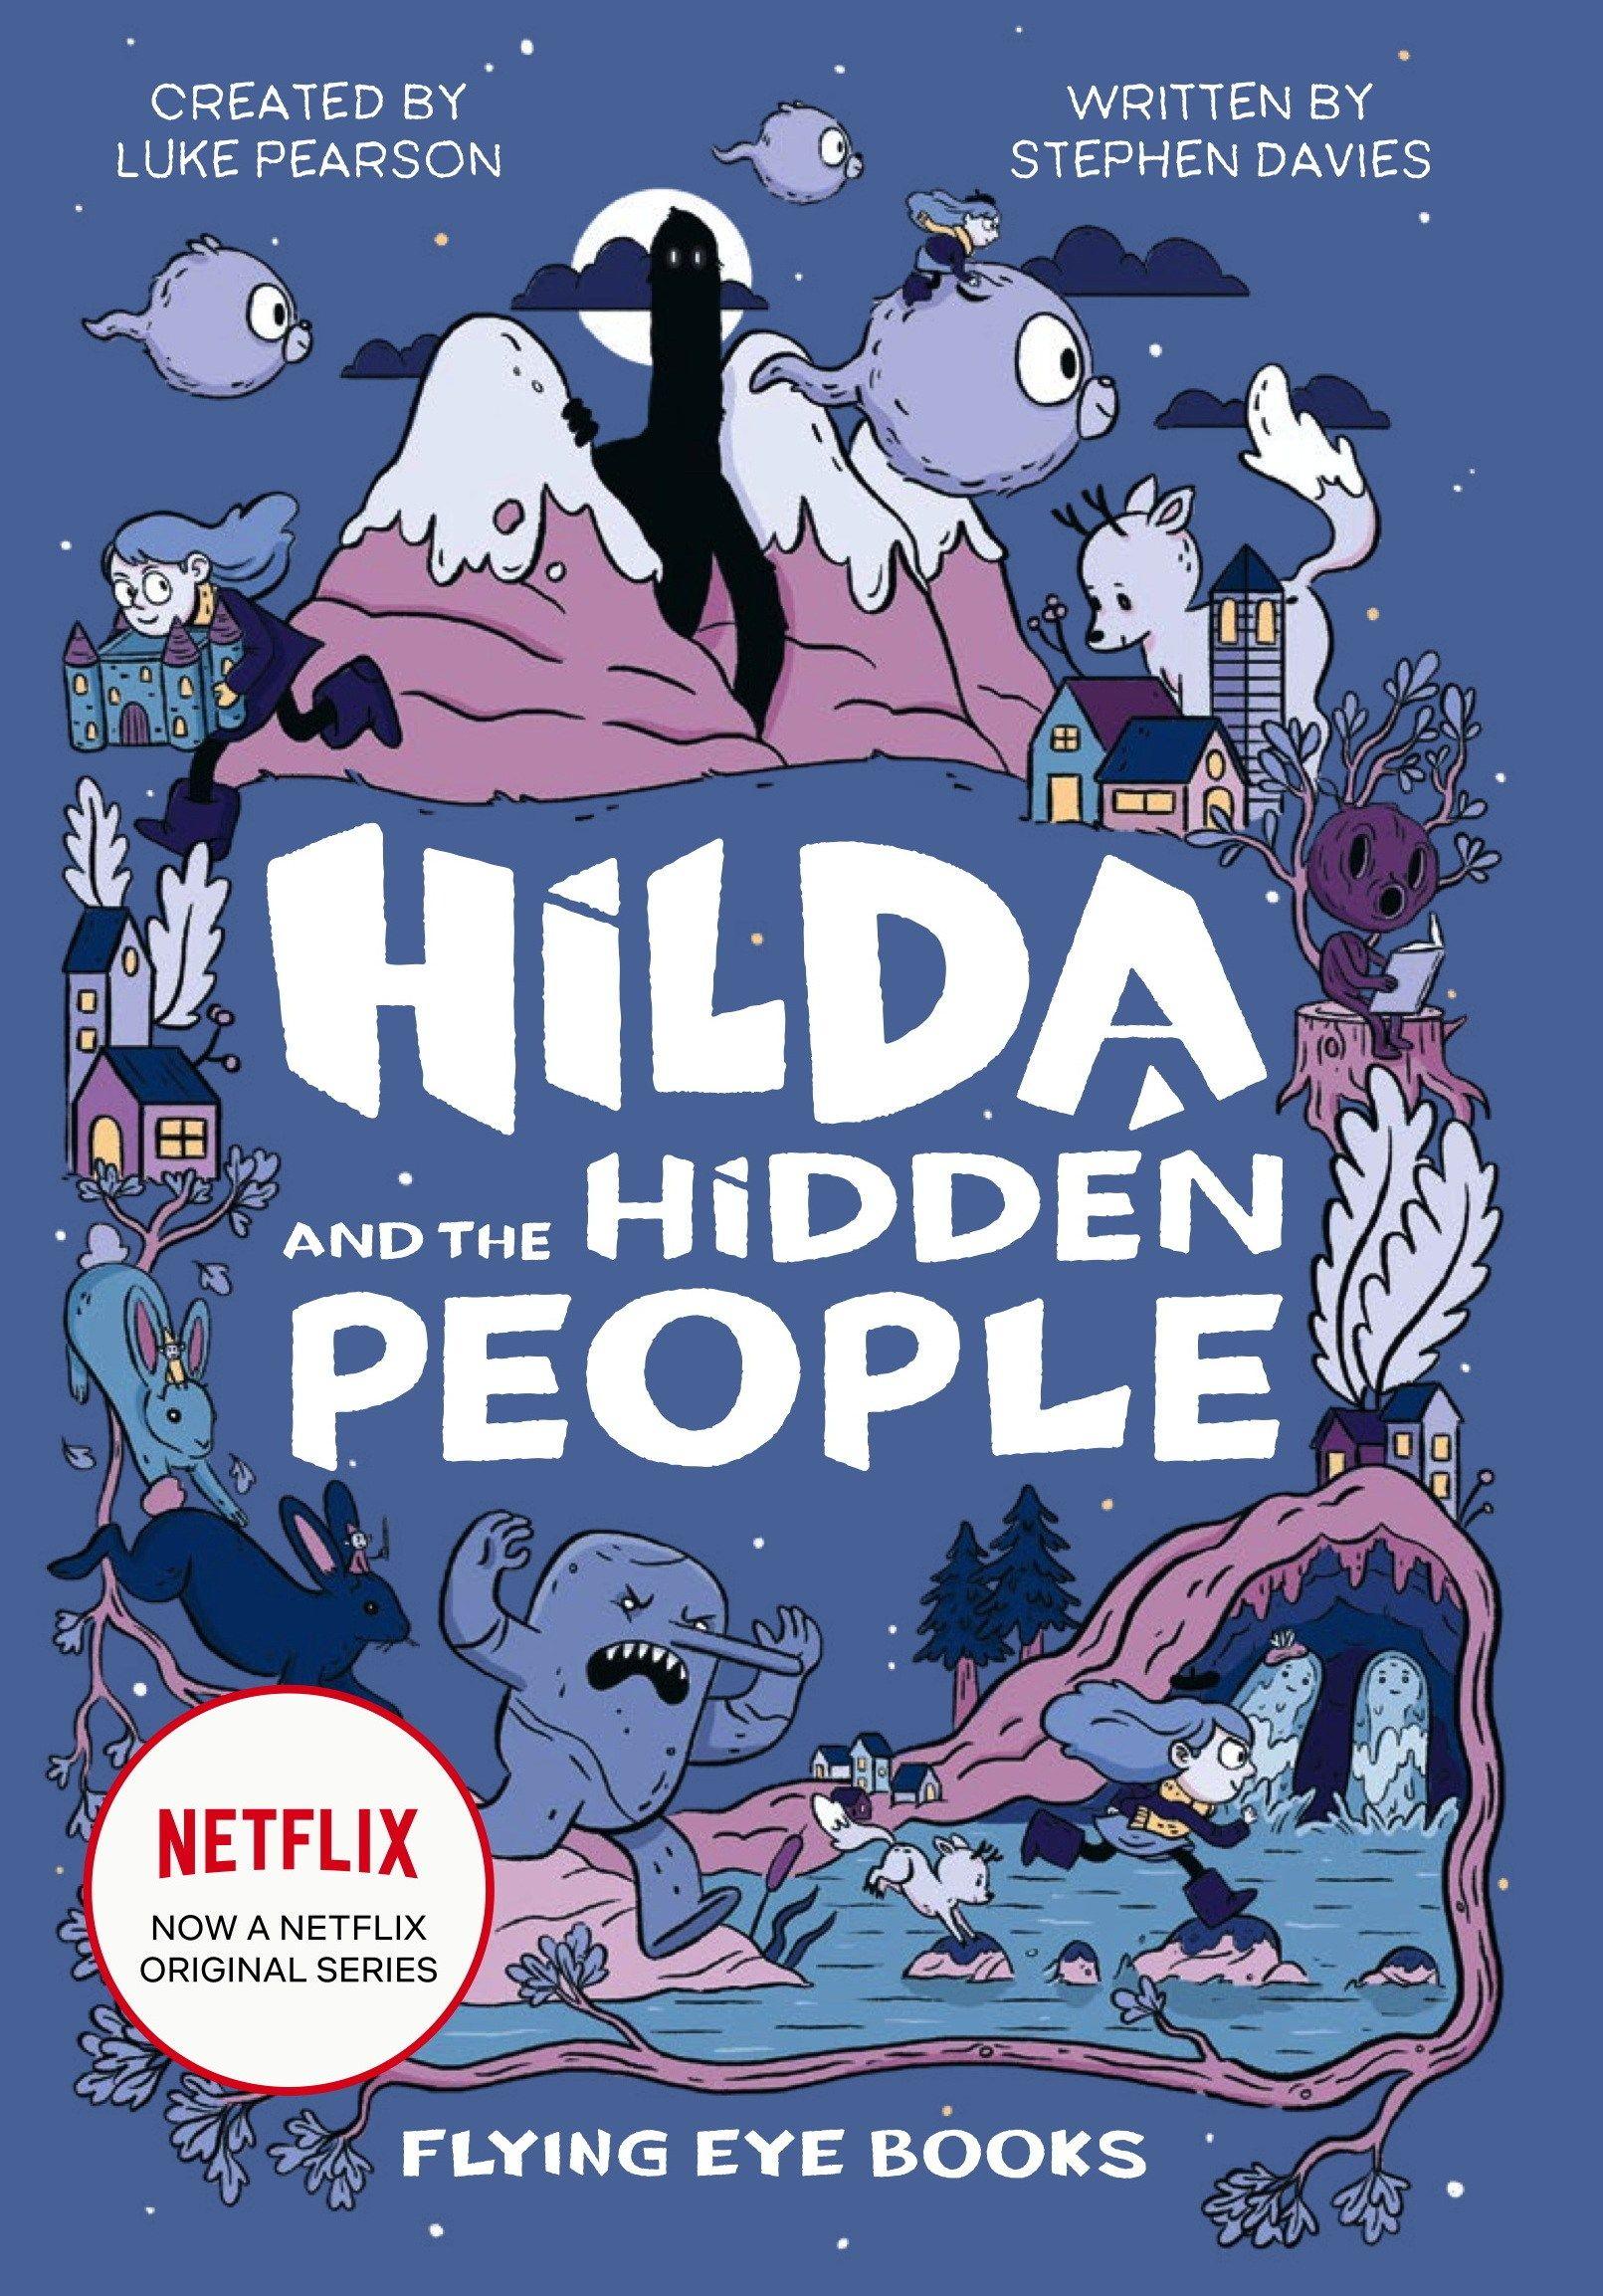 EXCLUSIVE: Hilda is coming to Netflix and we've got the first cover